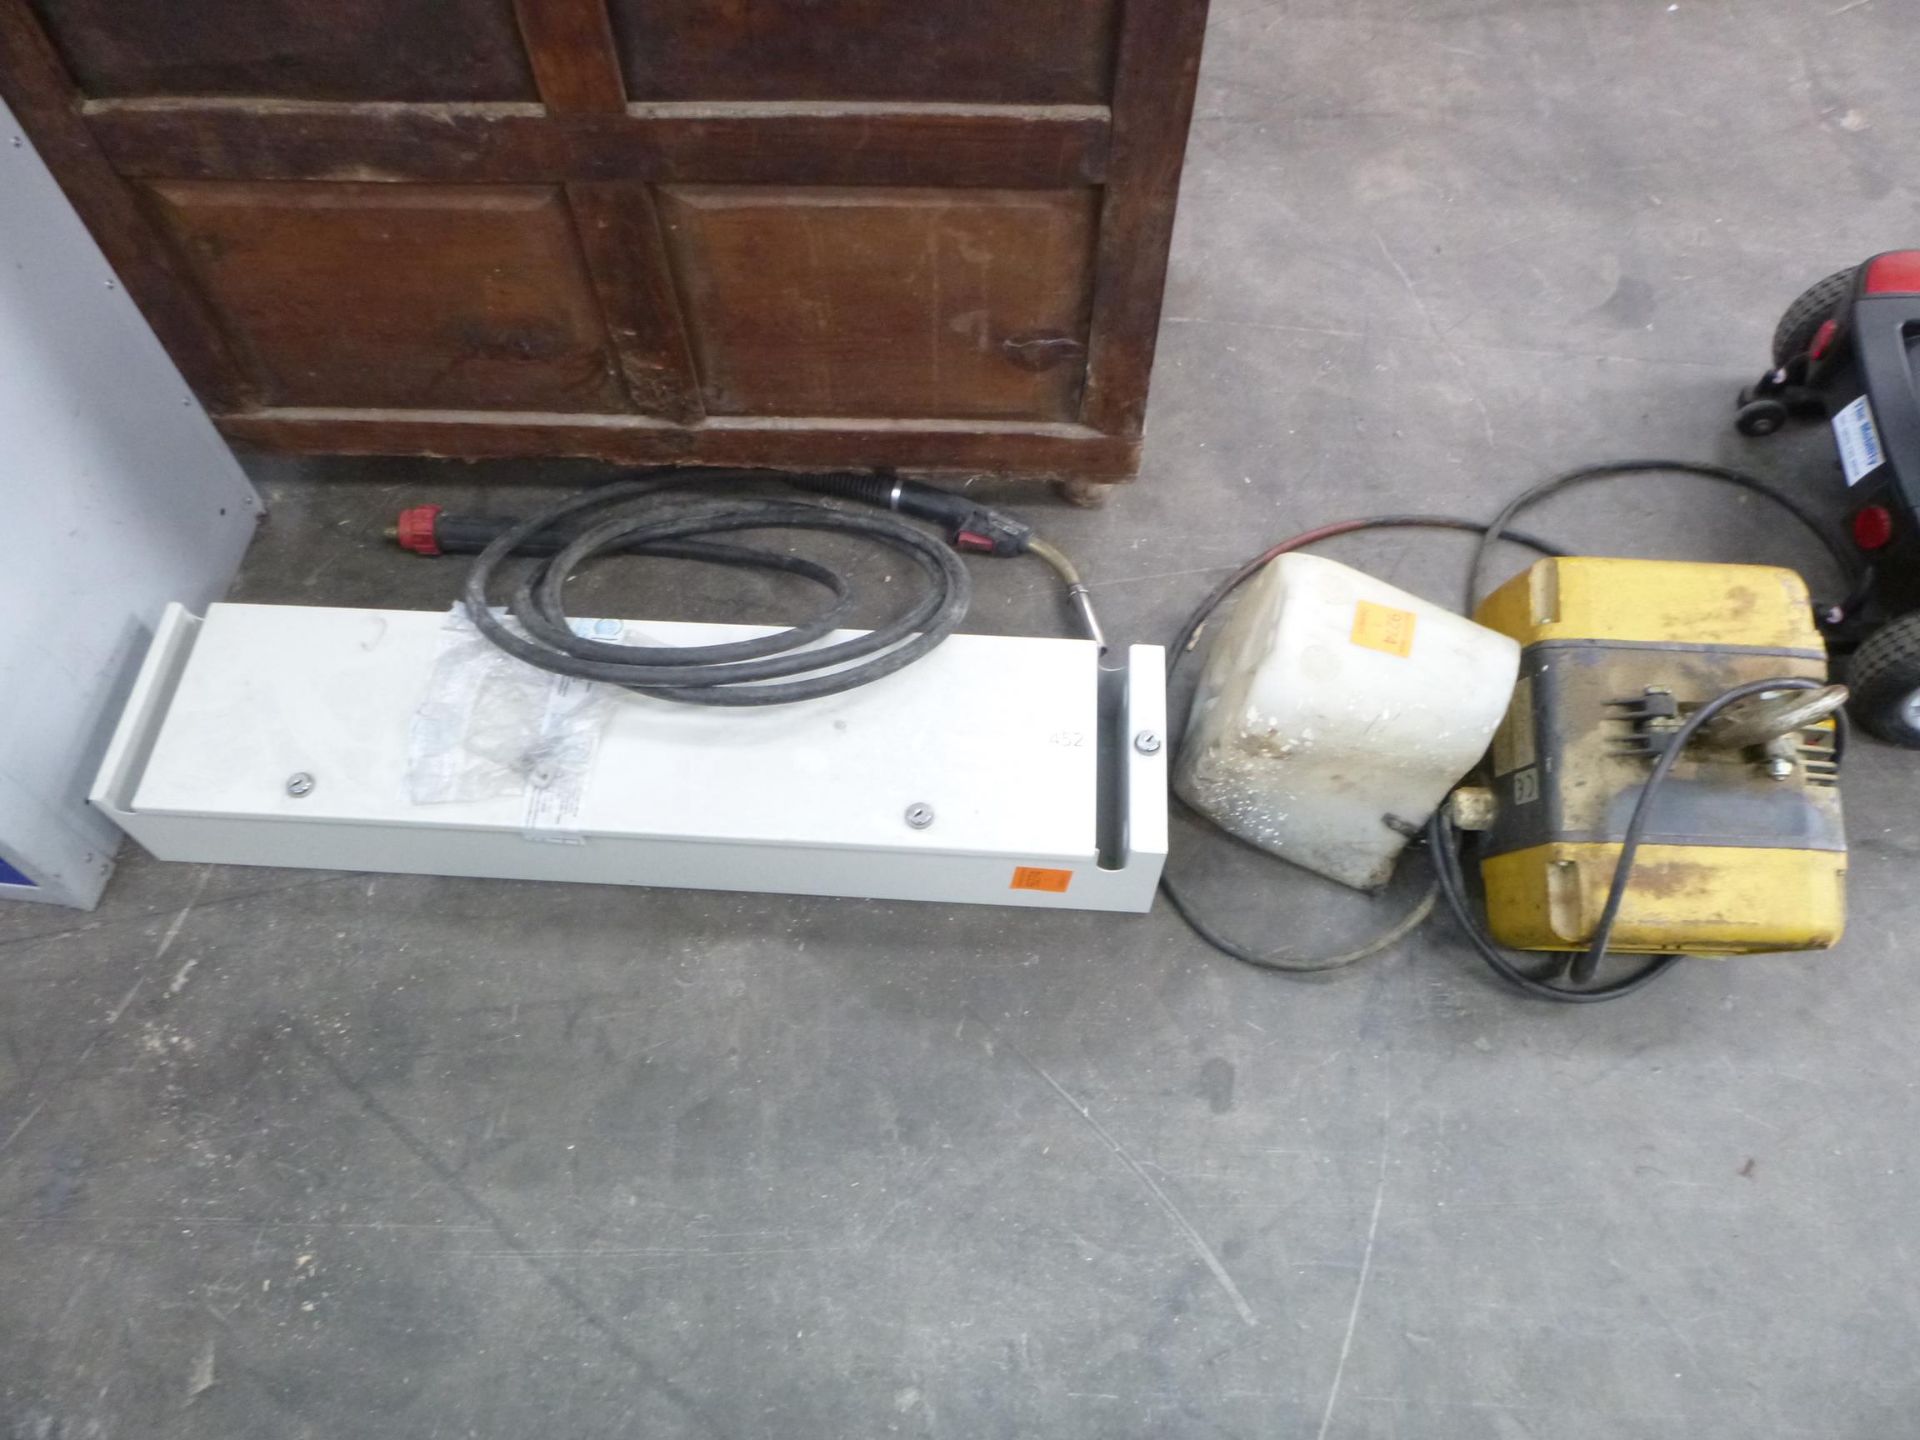 A BOC MG 251 Welding Lead and a GIS 0.5-1.0T on Lifting Hoist and Chain